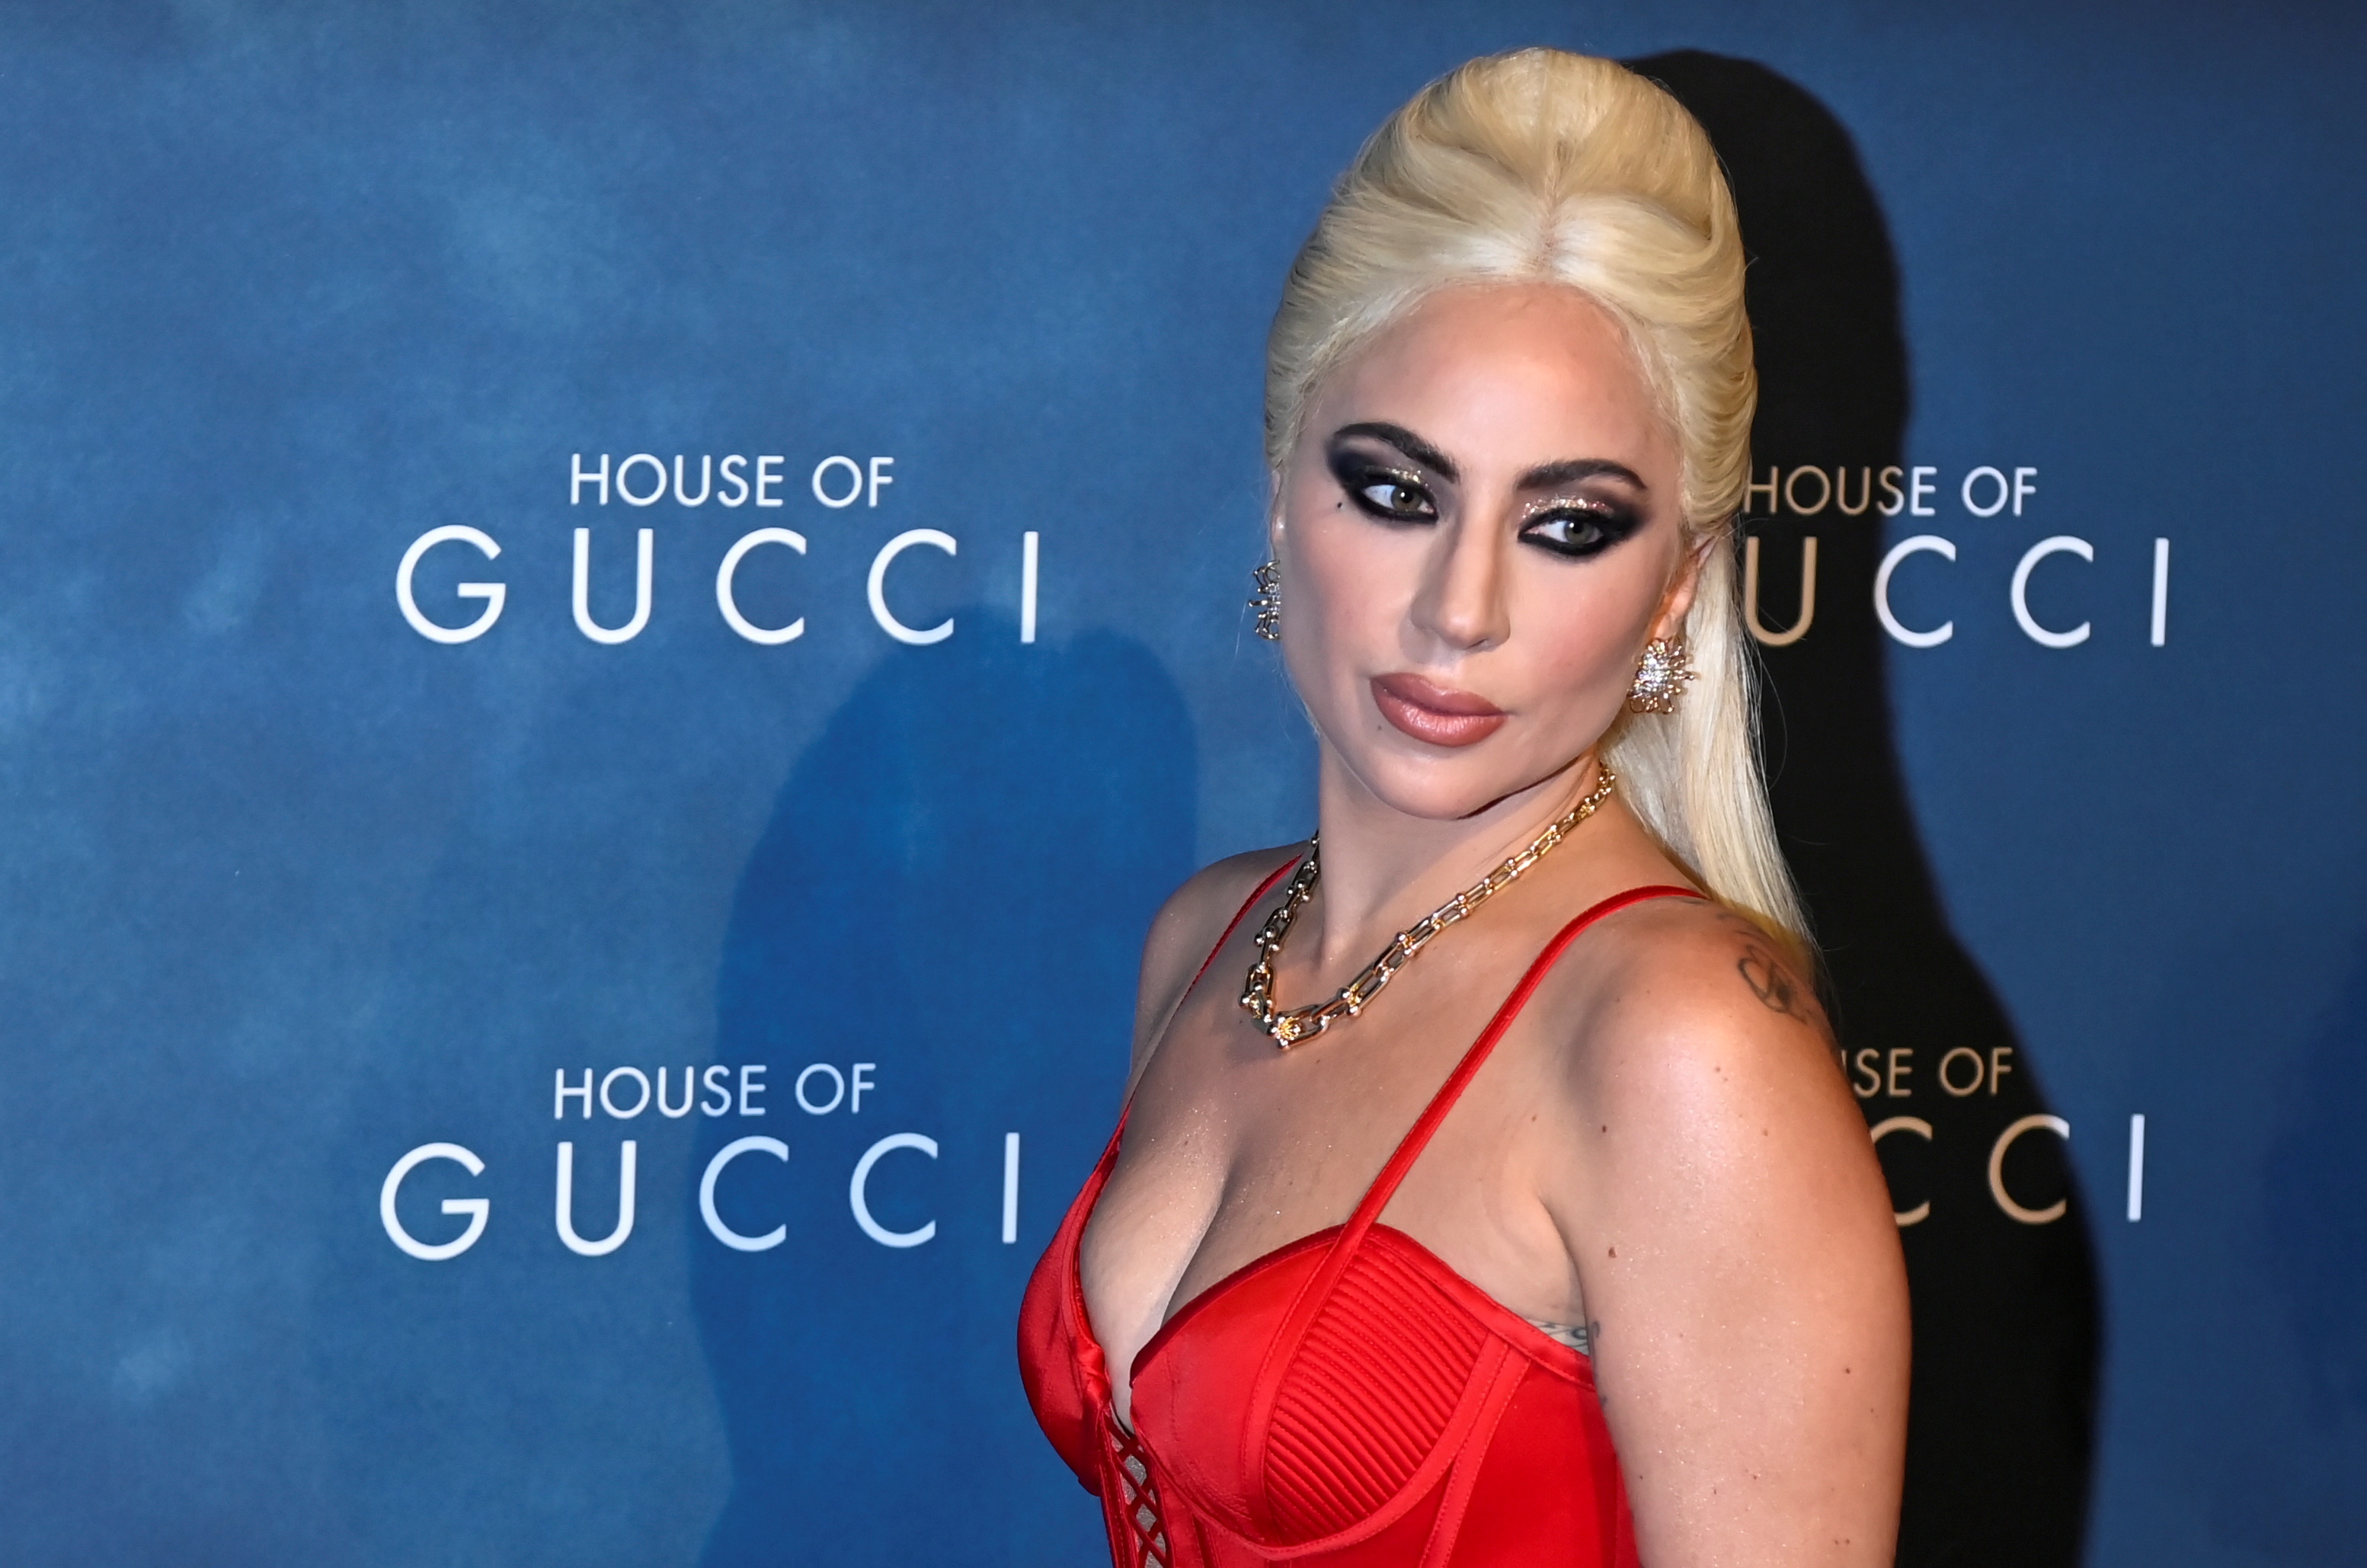 Cast member Lady Gaga poses for a photo as she arrives at the Italian Premiere of the film 'House of Gucci' at the Space Cinema Odeon in Milan, Italy, November 13, 2021. REUTERS/Flavio Lo Scalzo/File Photo